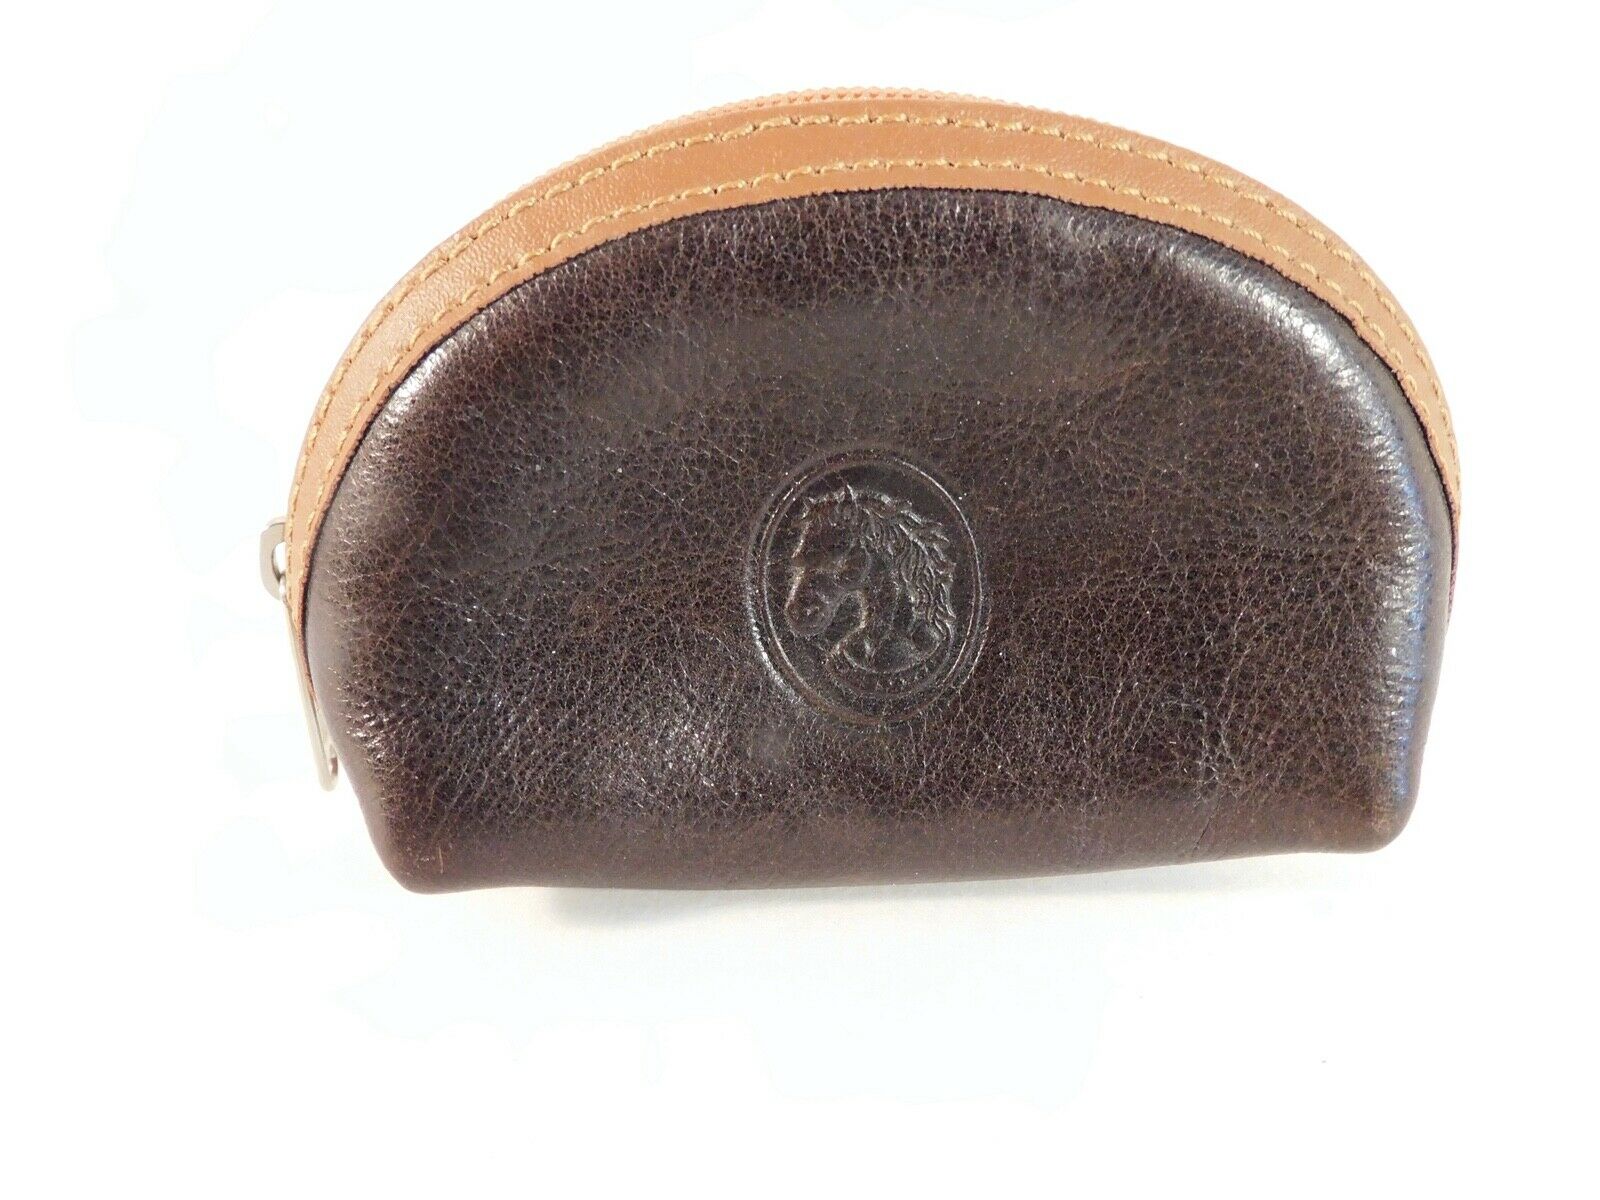 Vintage Ubrique (spain) Leather Coin Purse - Free Shipping